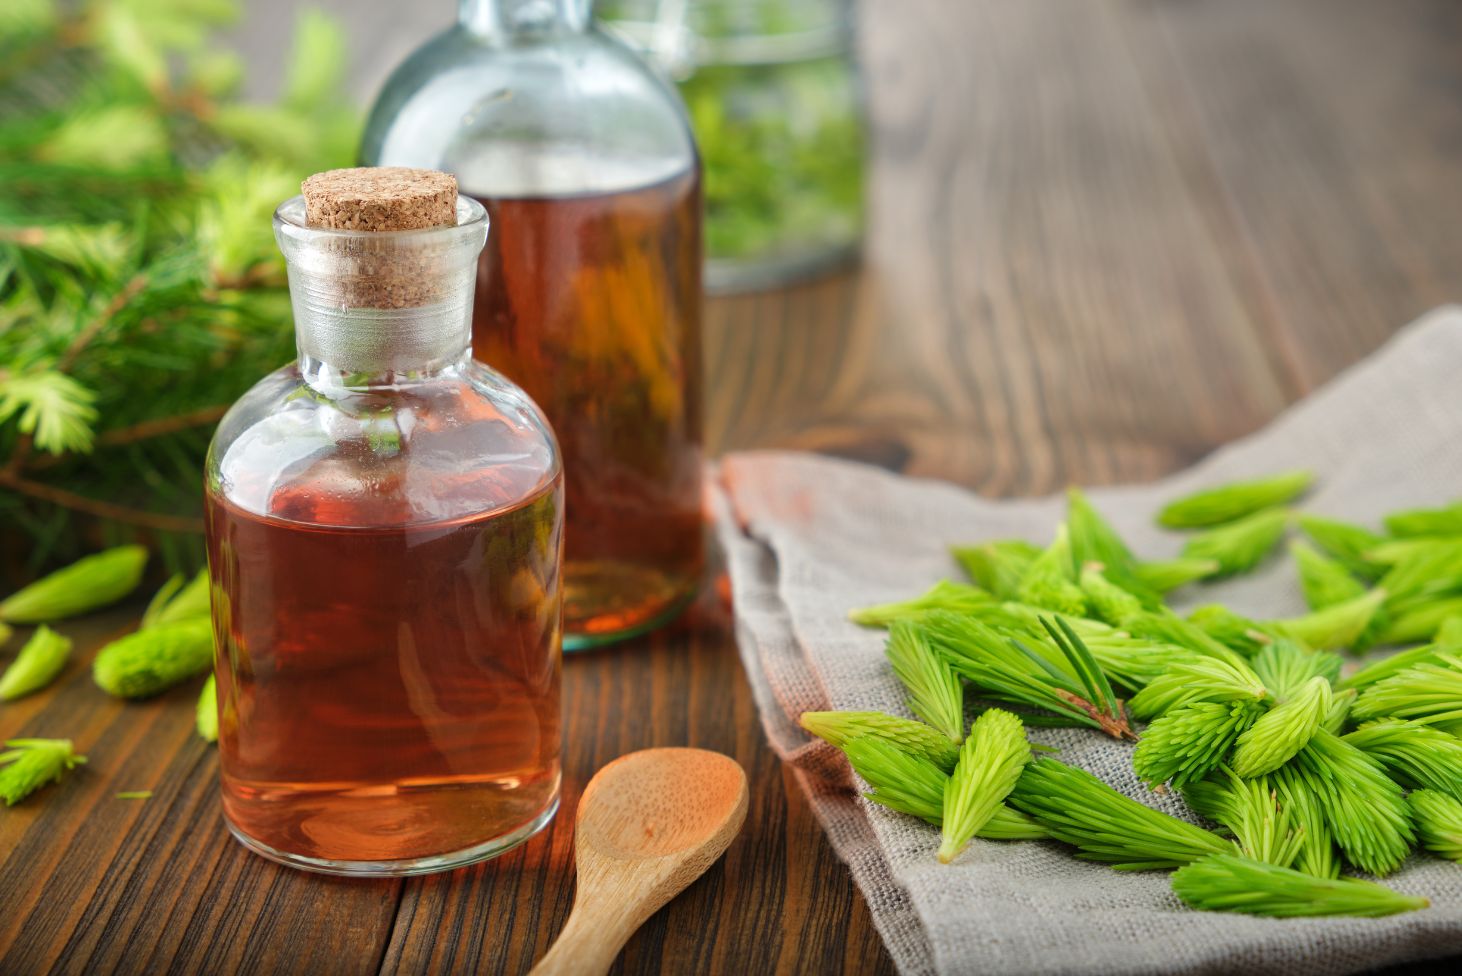 How to Make Fir Buds Syrup - 7 Amazing Health Benefits